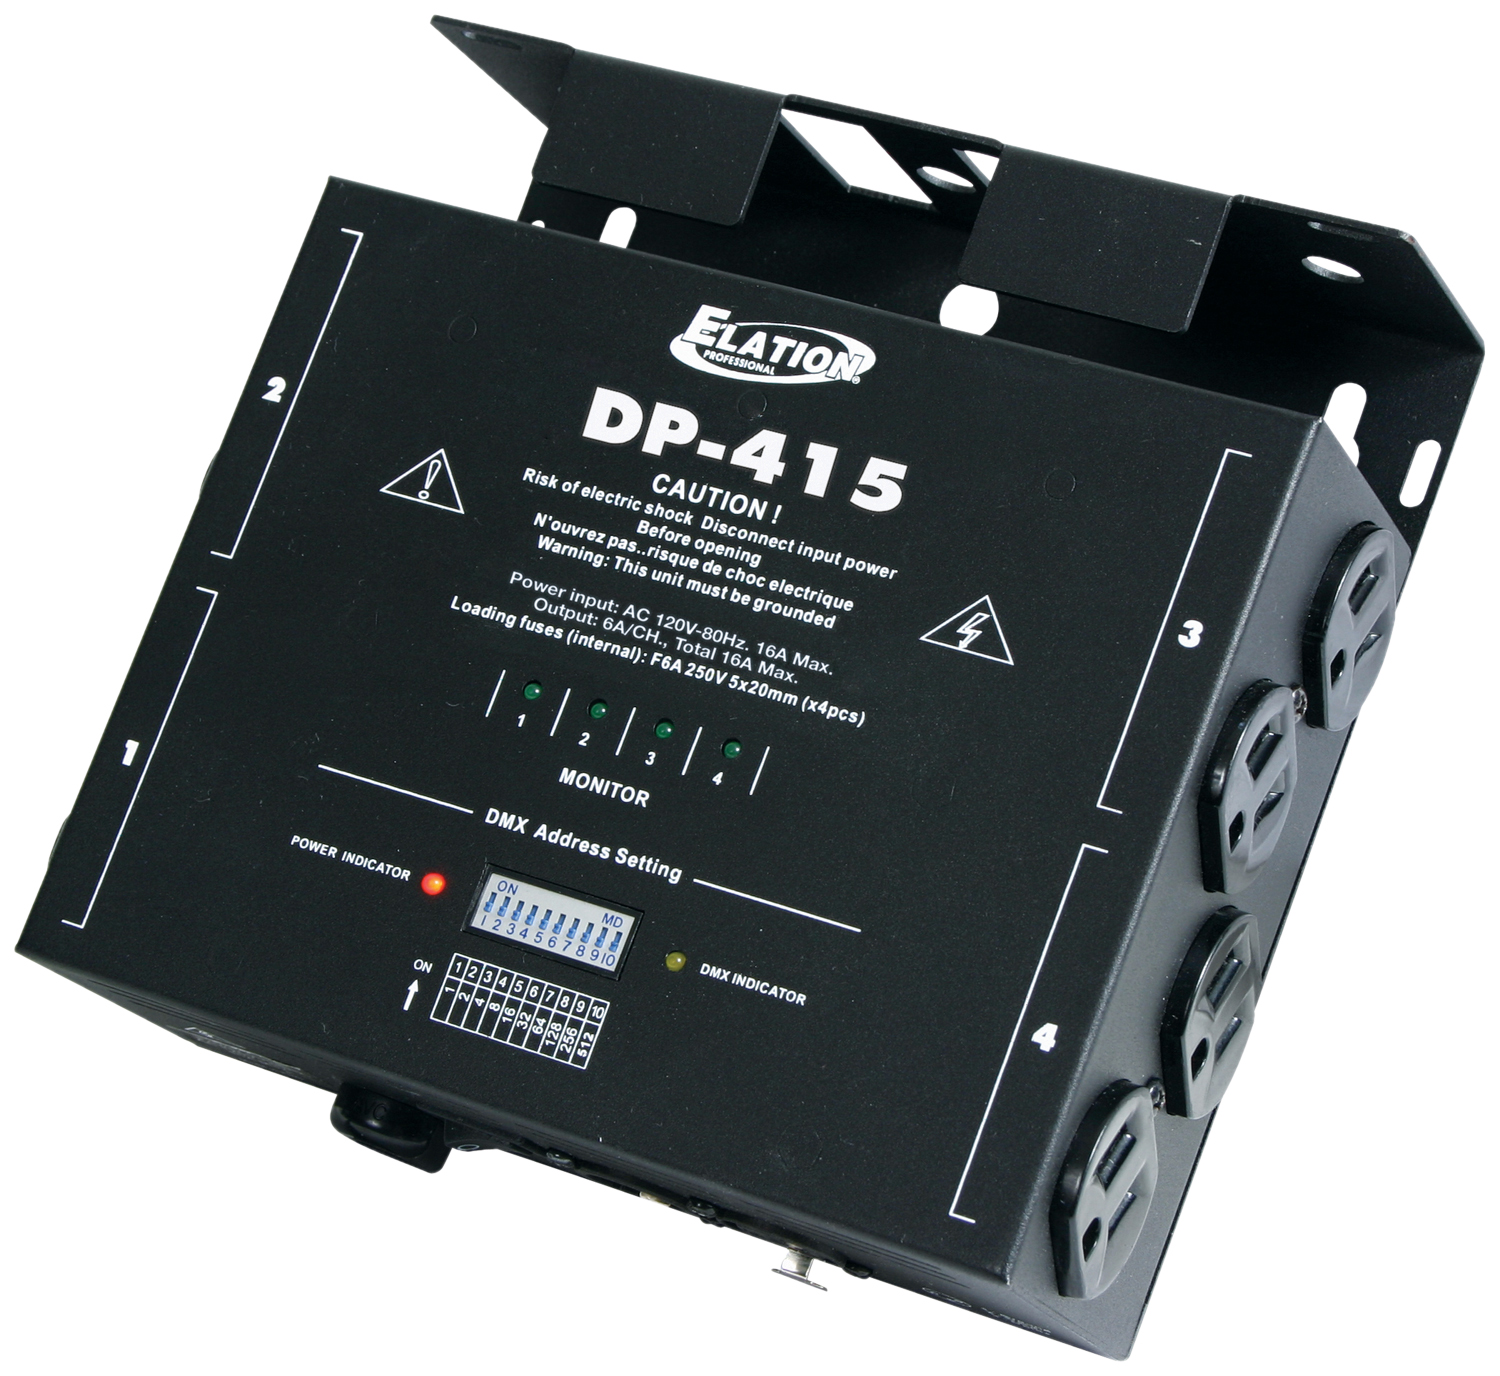 American DJ and Audio American DJ DP415 DMX Dimmer Switch, 4-Channel